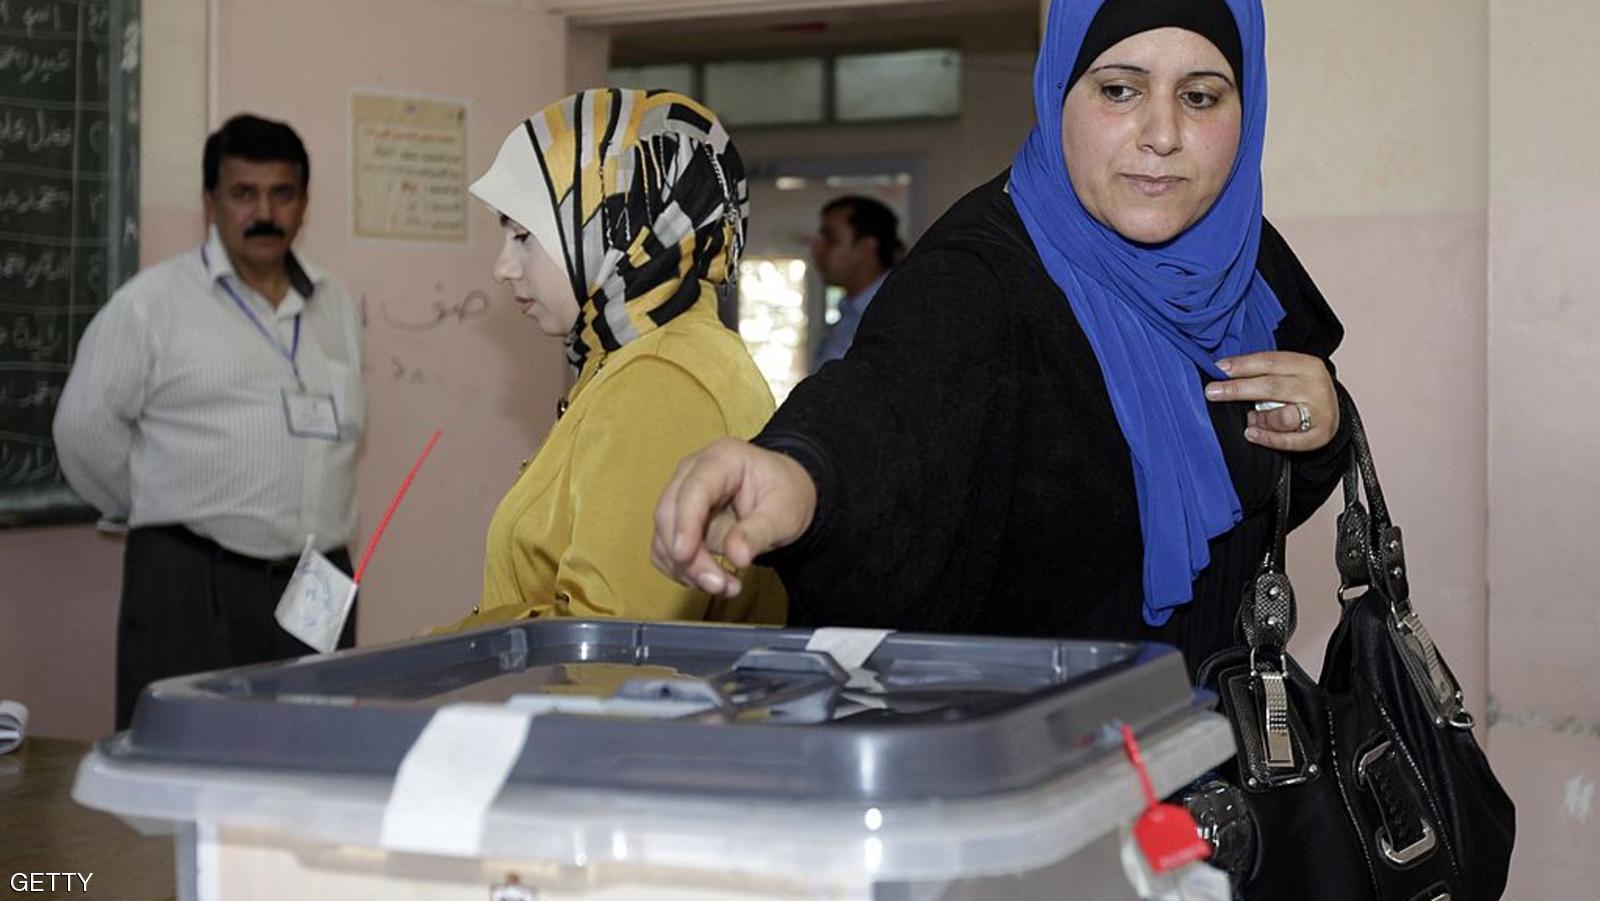 A Jordanian woman casts her ballot for municipal elections at a polling station in Amman on August 27, 2013. The Muslim Brotherhood, the main opposition party, is boycotting the polls, charging that, despite repeated promises since the Arab Spring of 2011, there is no real readiness for change.  AFP PHOTO/KHALIL MAZRAAWI        (Photo credit should read KHALIL MAZRAAWI/AFP/Getty Images)